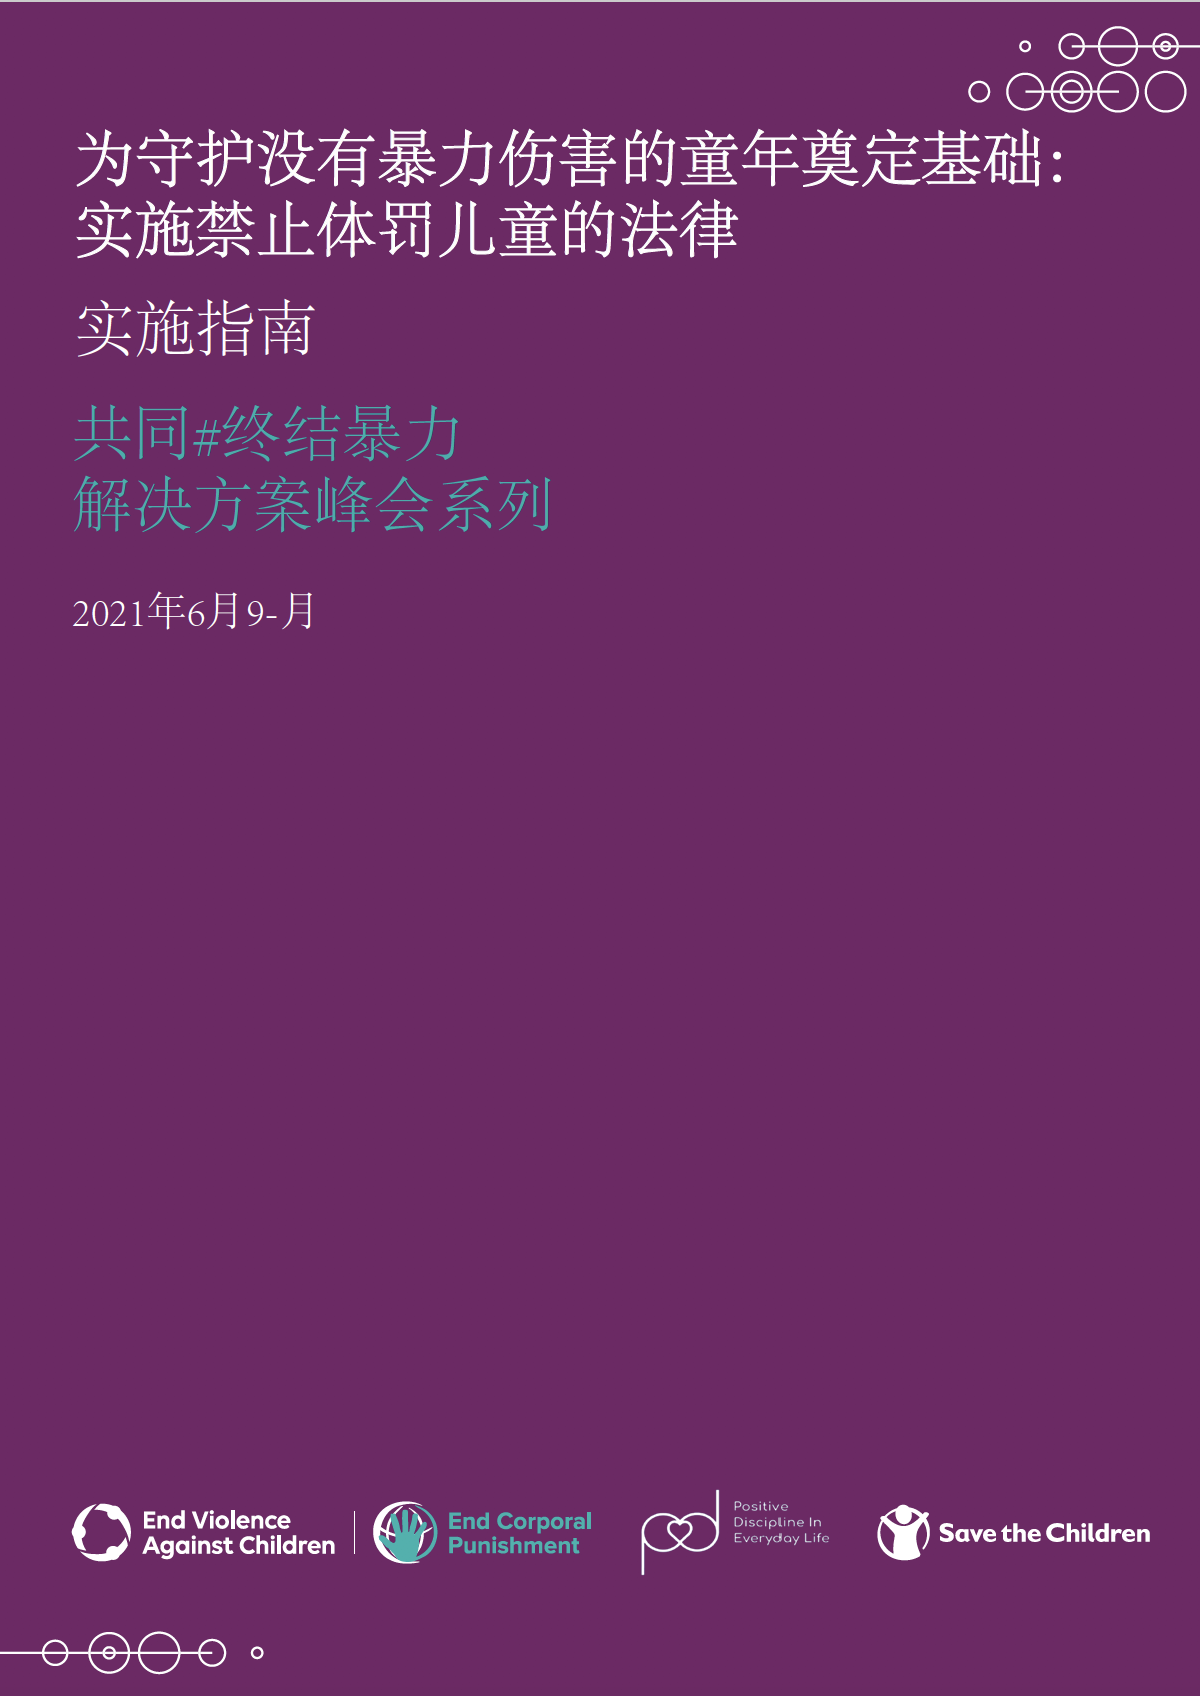 Implementation guidance in Chinese